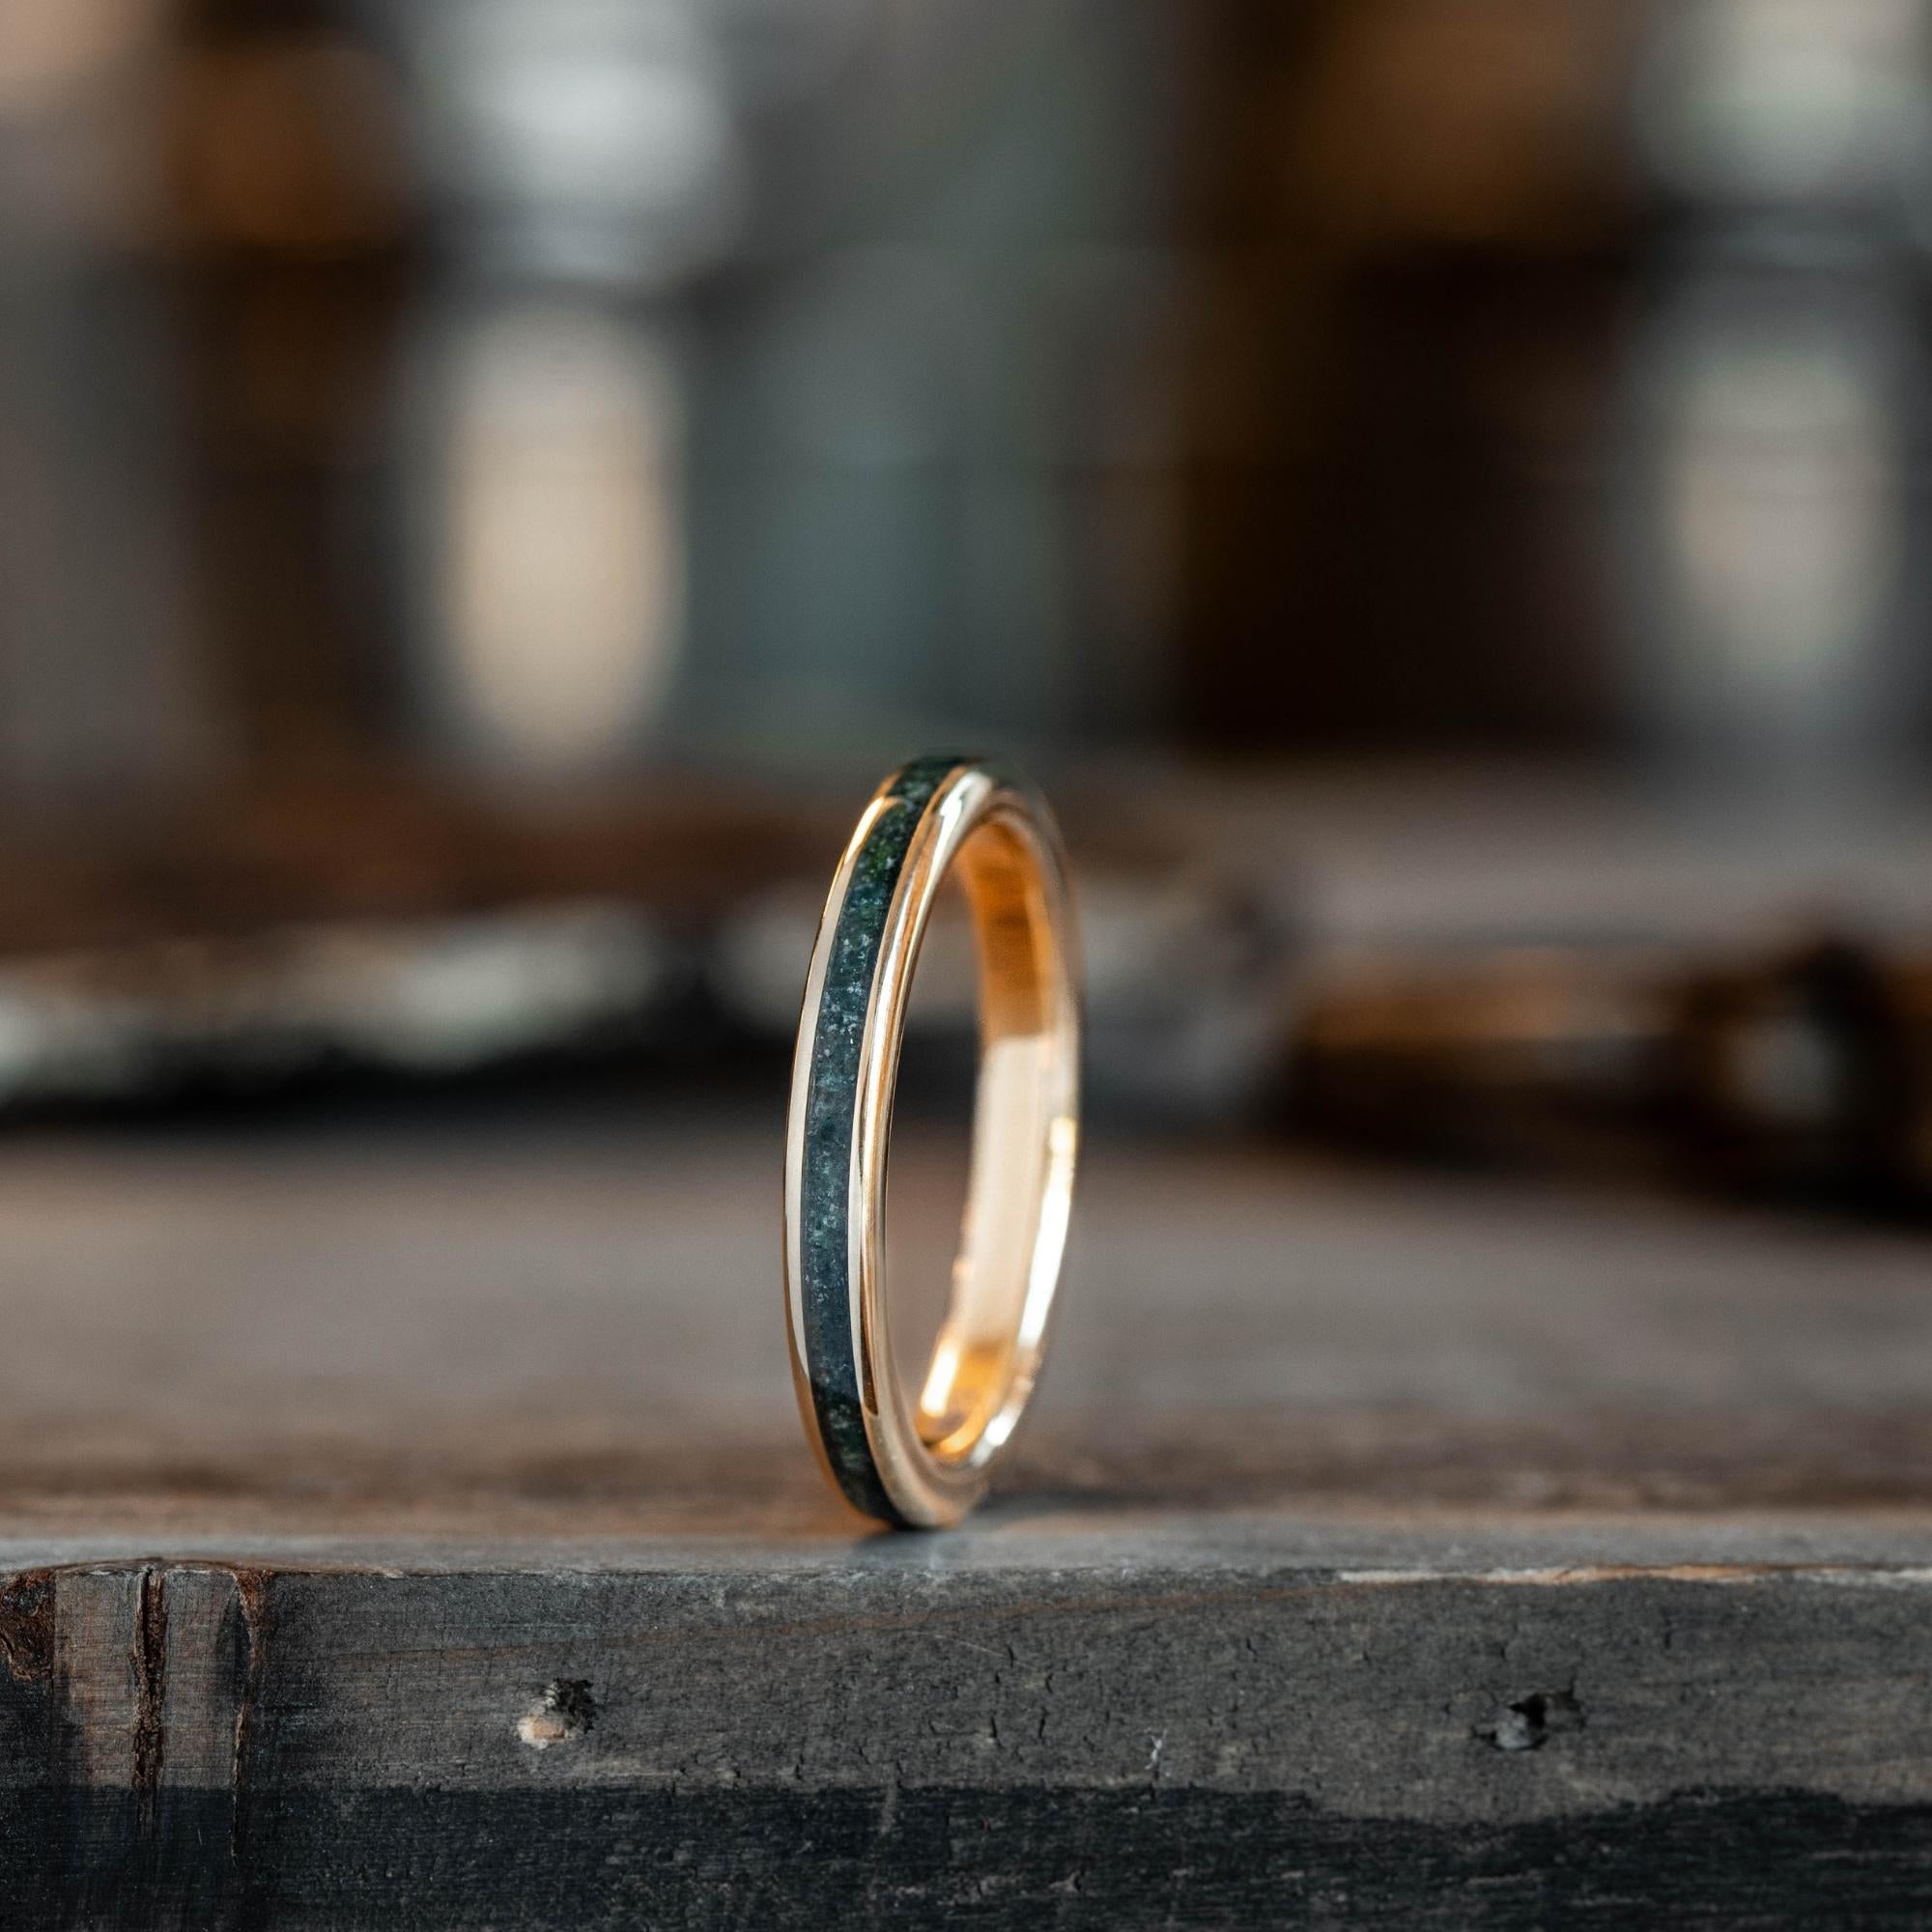 The Shenandoah | Men's Gold Moss Agate Wedding Band with Gold Flakes | Rustic and Main